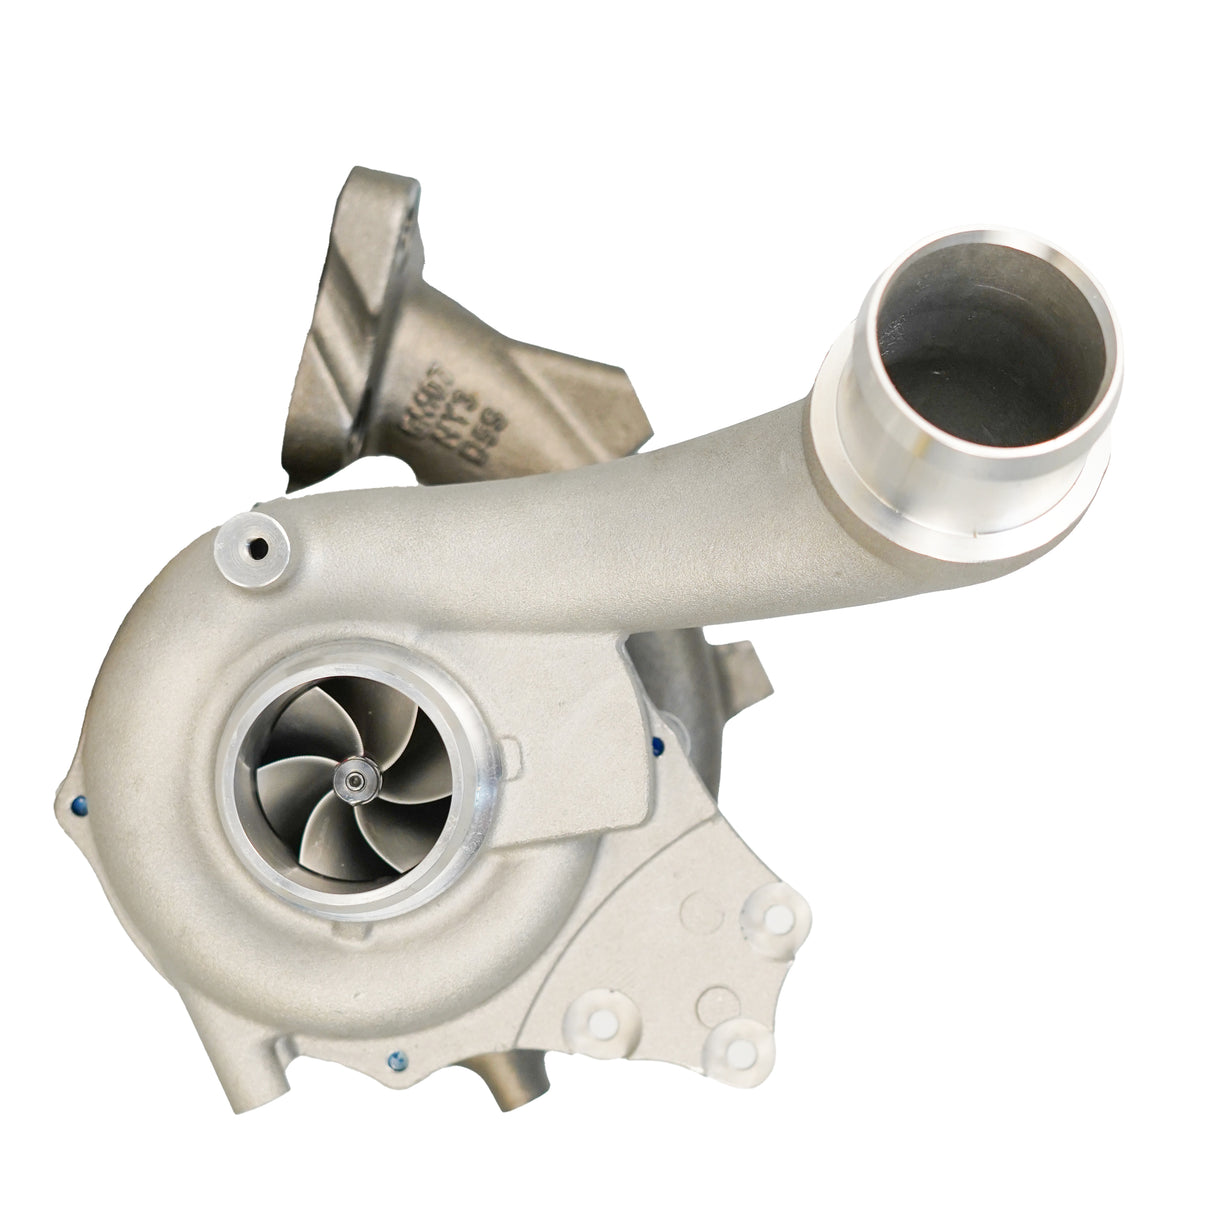 CCT Stage Two Billet Turbo charger To Suit Nissan Navara D40 / Pathfinder R51 4-Bolt Style